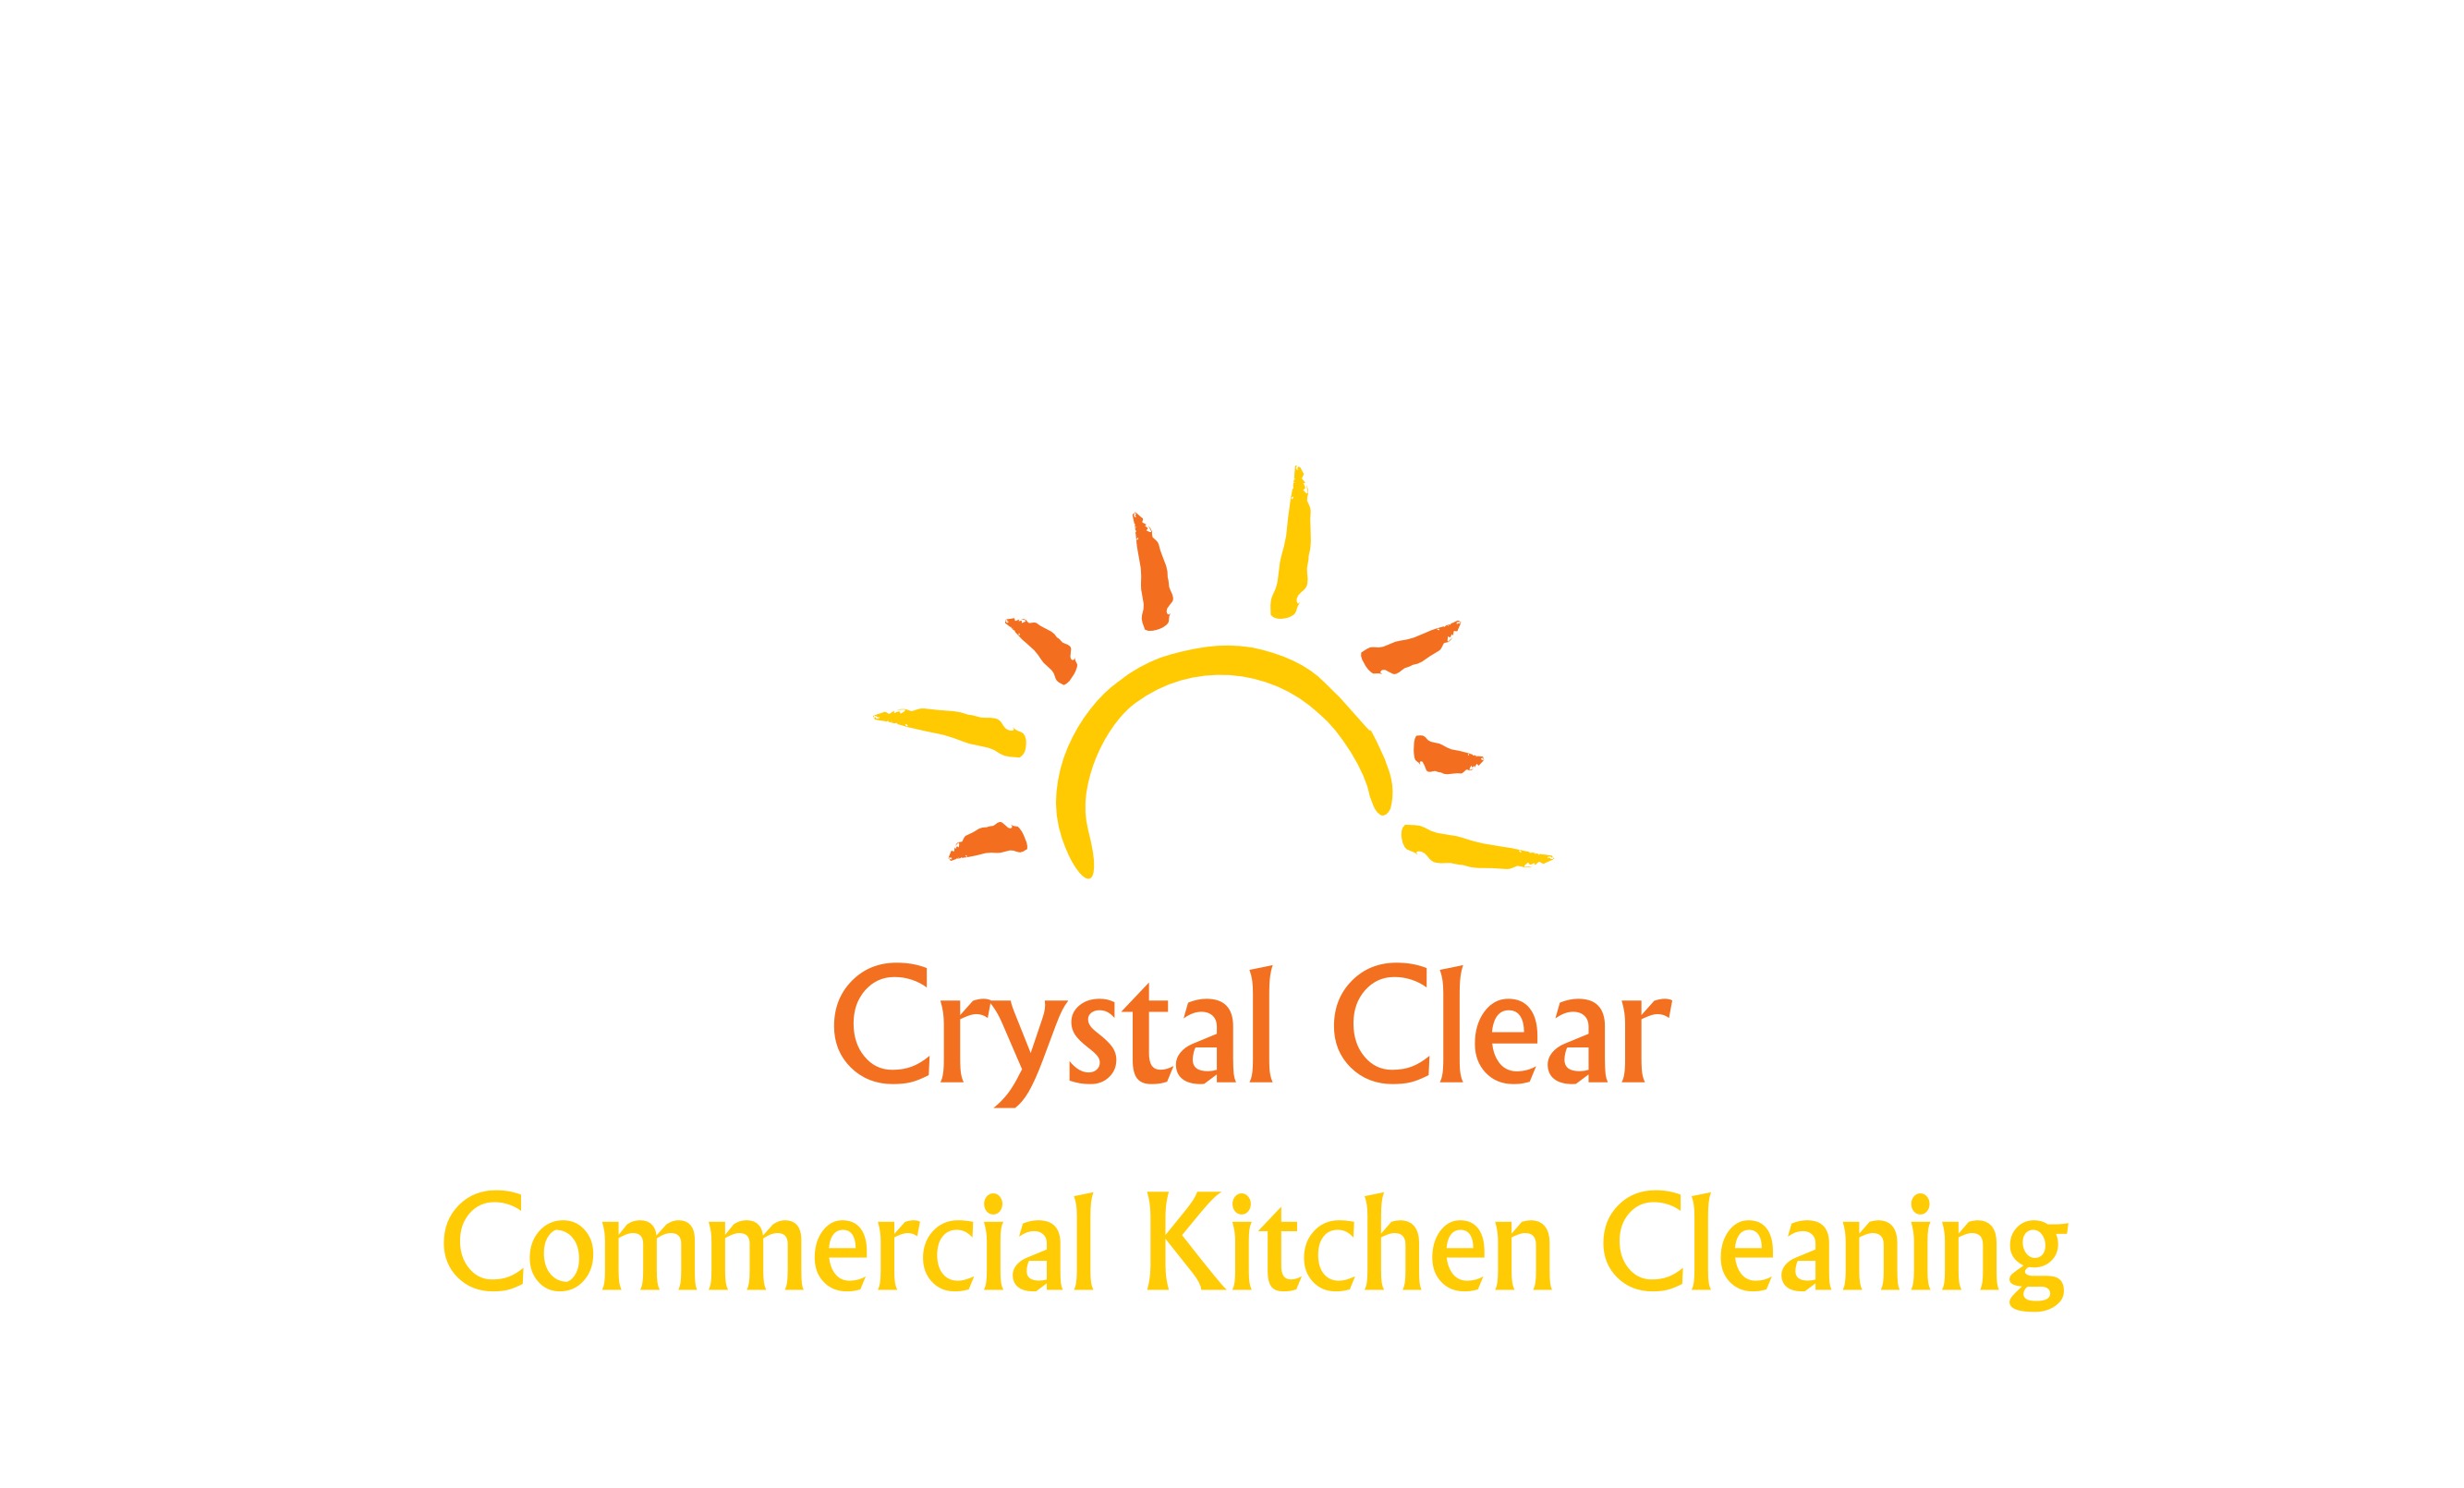 Crystal Clear Commercial Kitchen Cleaning